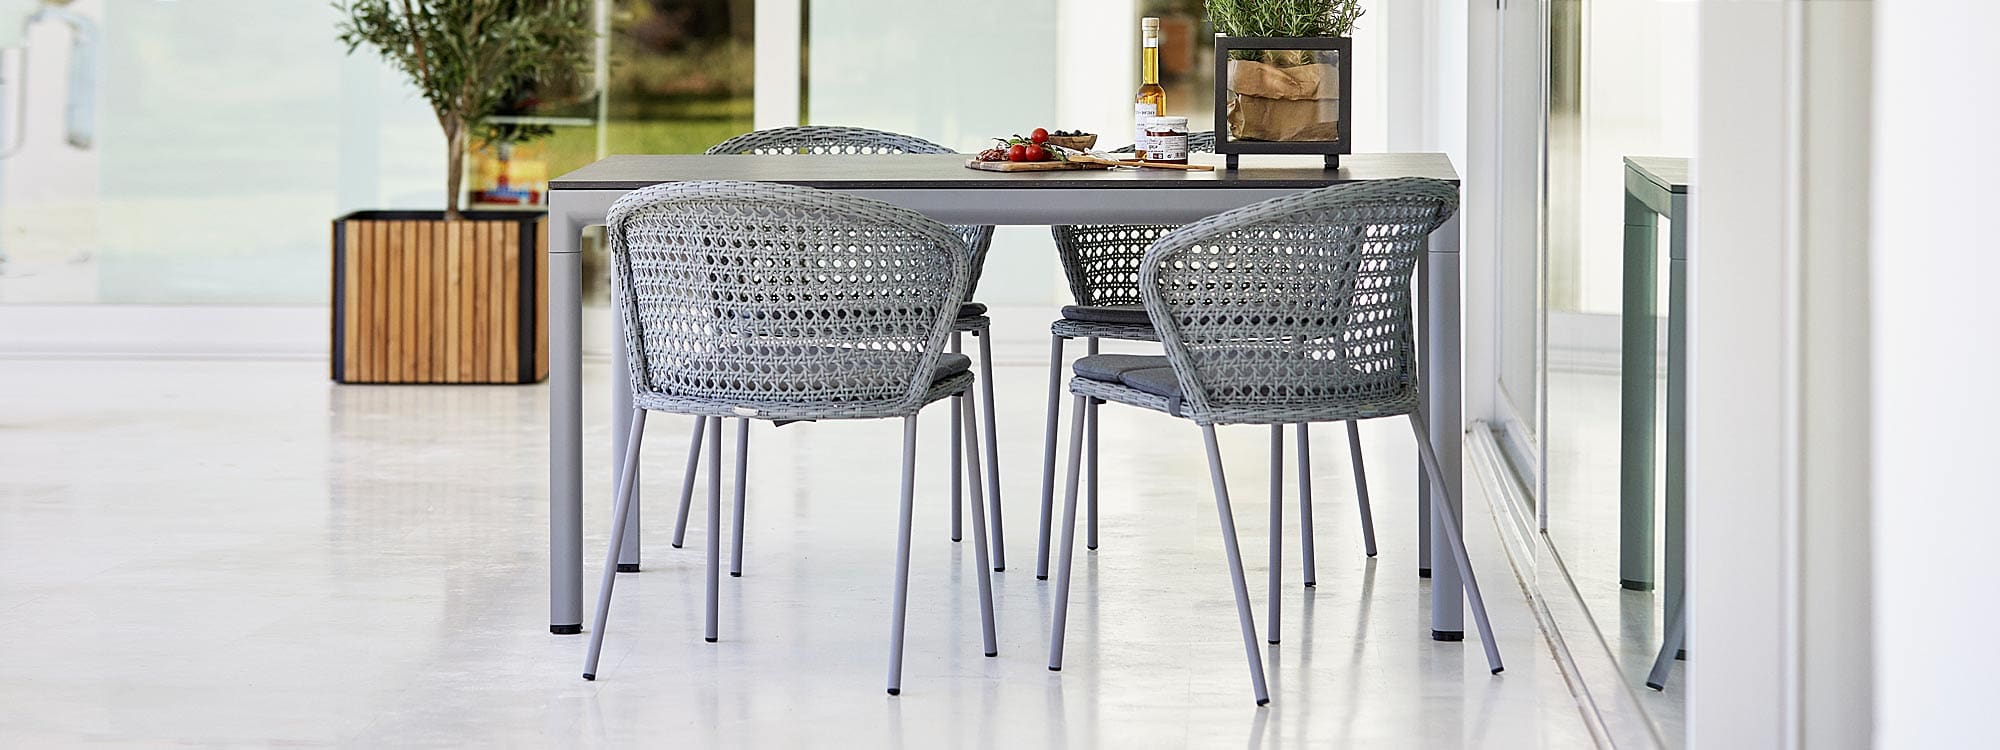 Image of light-grey Cane-line Lean rattan chairs and light-grey Drop garden dining table